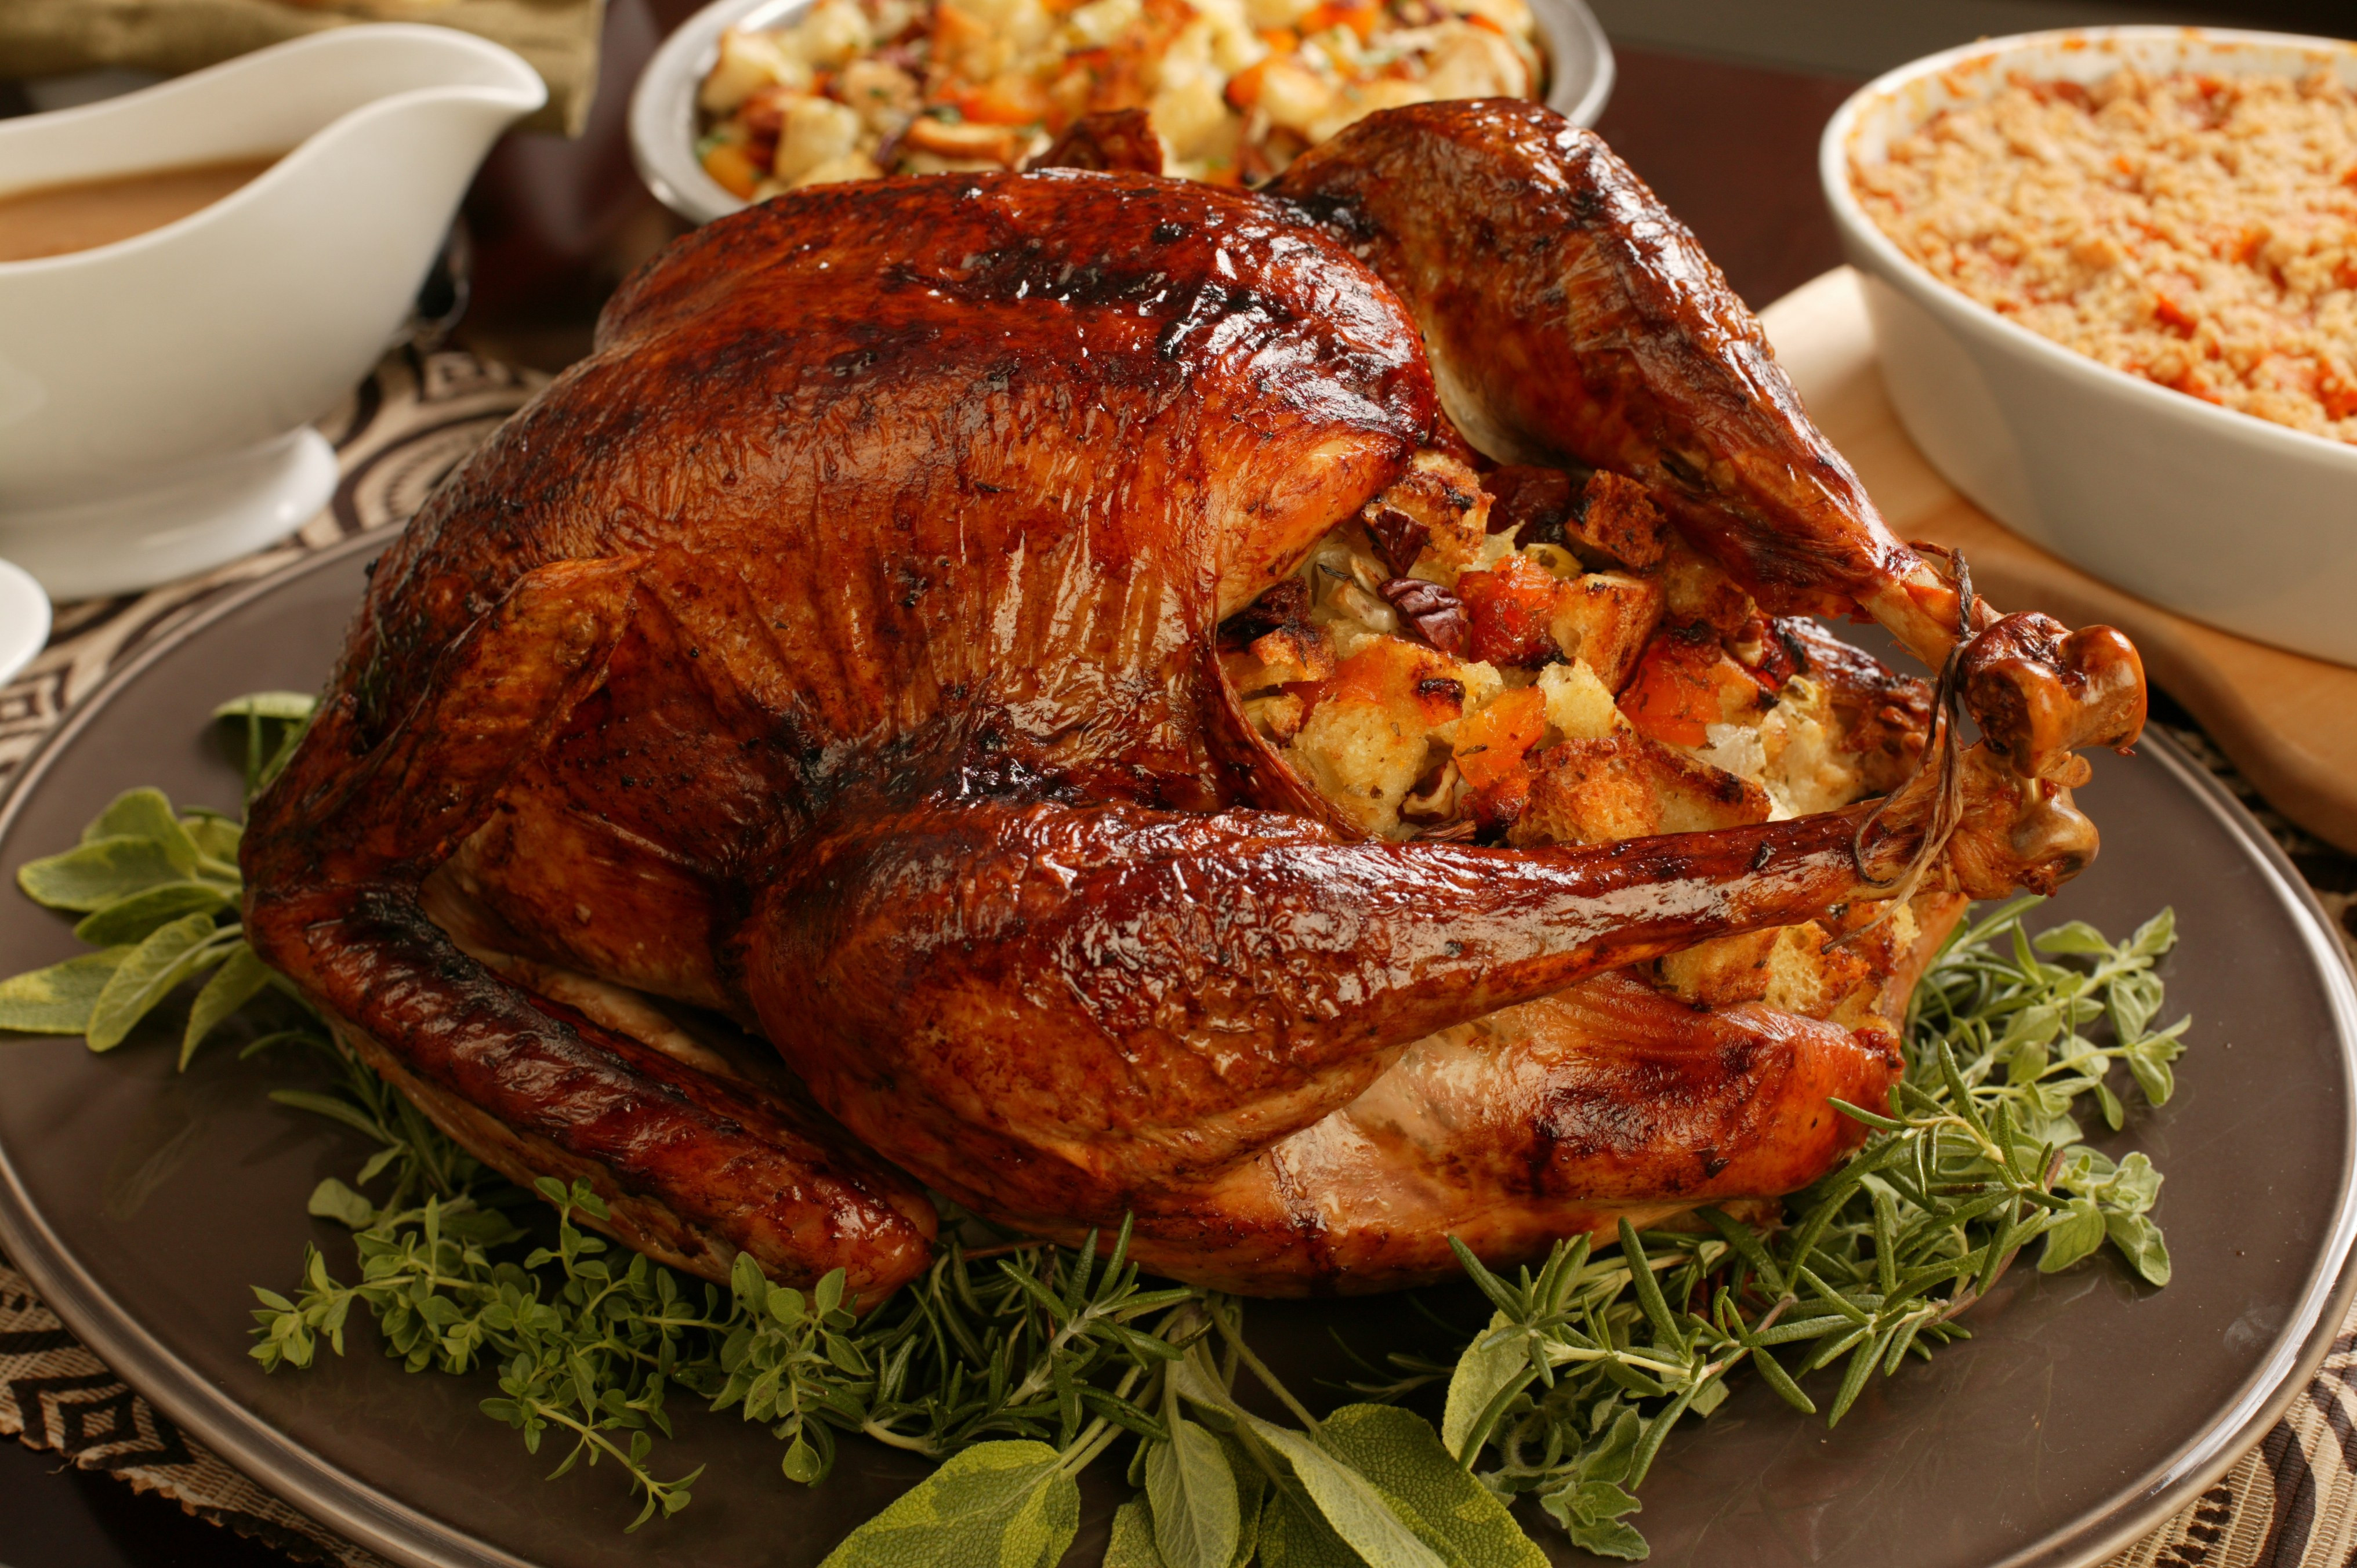 Recipes For Thanksgiving Turkey
 Classic Roast Turkey With Herbed Stuffing and Old